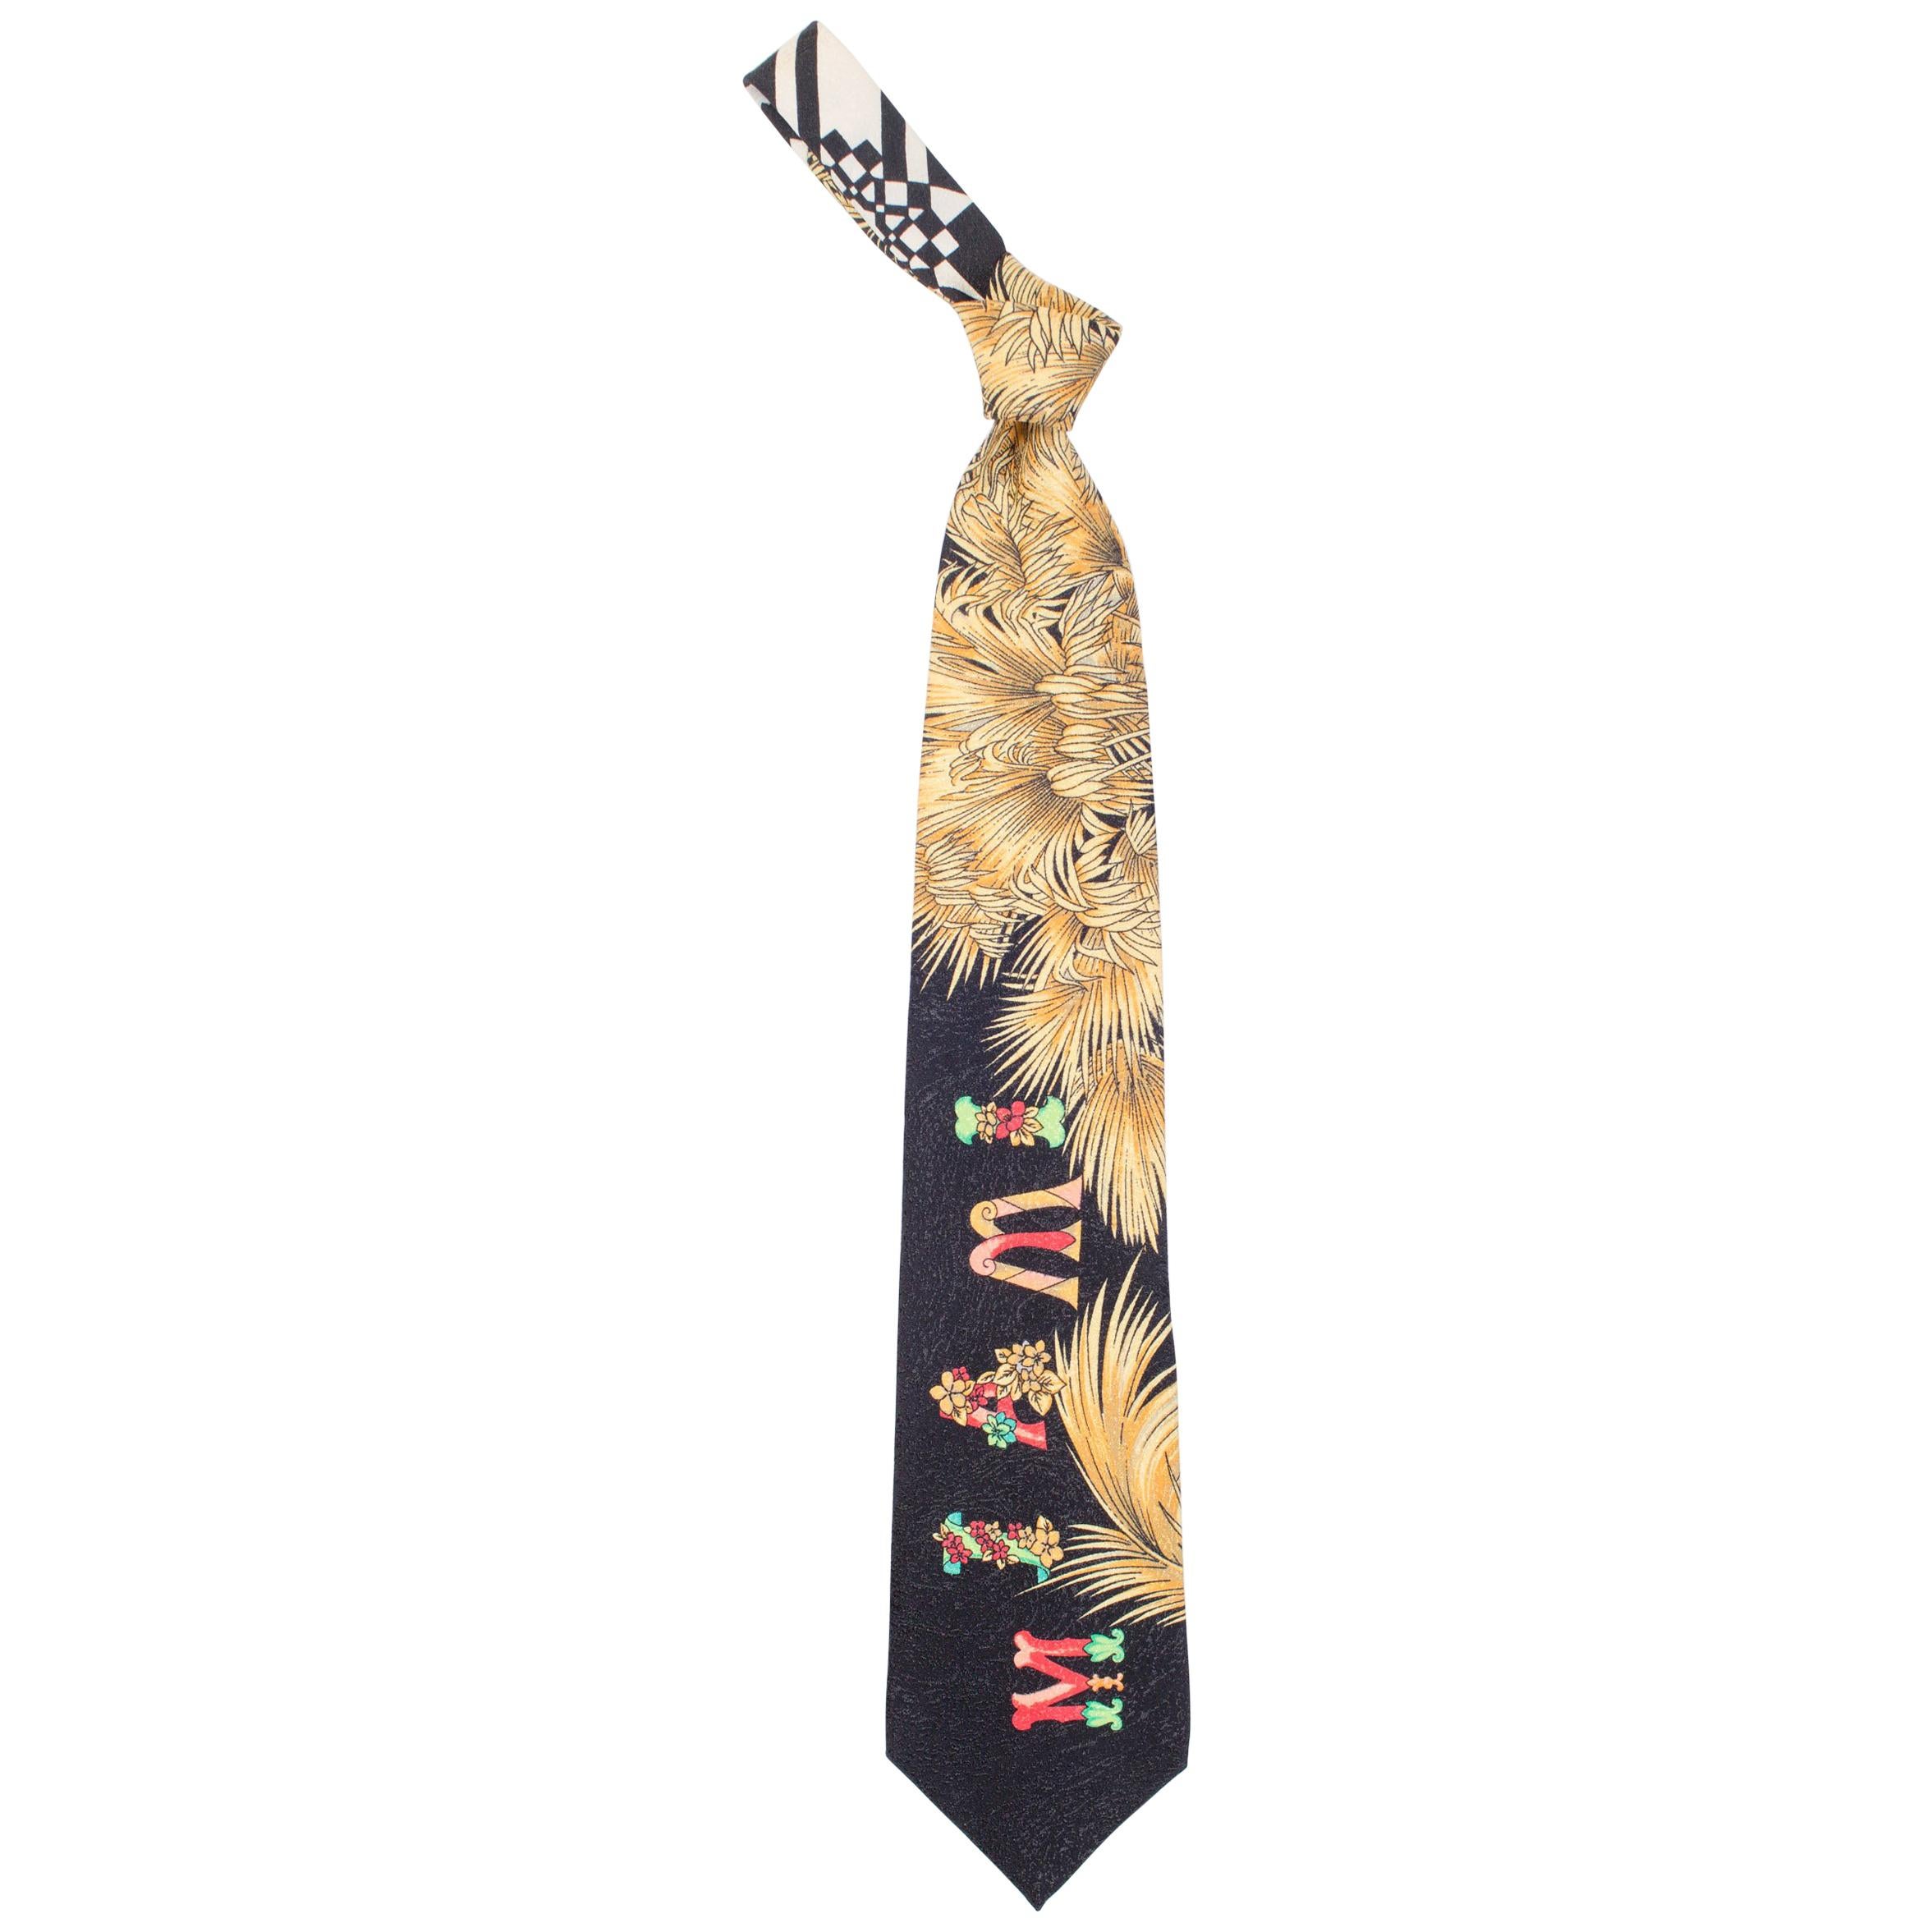 1990S GIANNI VERSACE Black Miami Tie With Gold Palm Trees